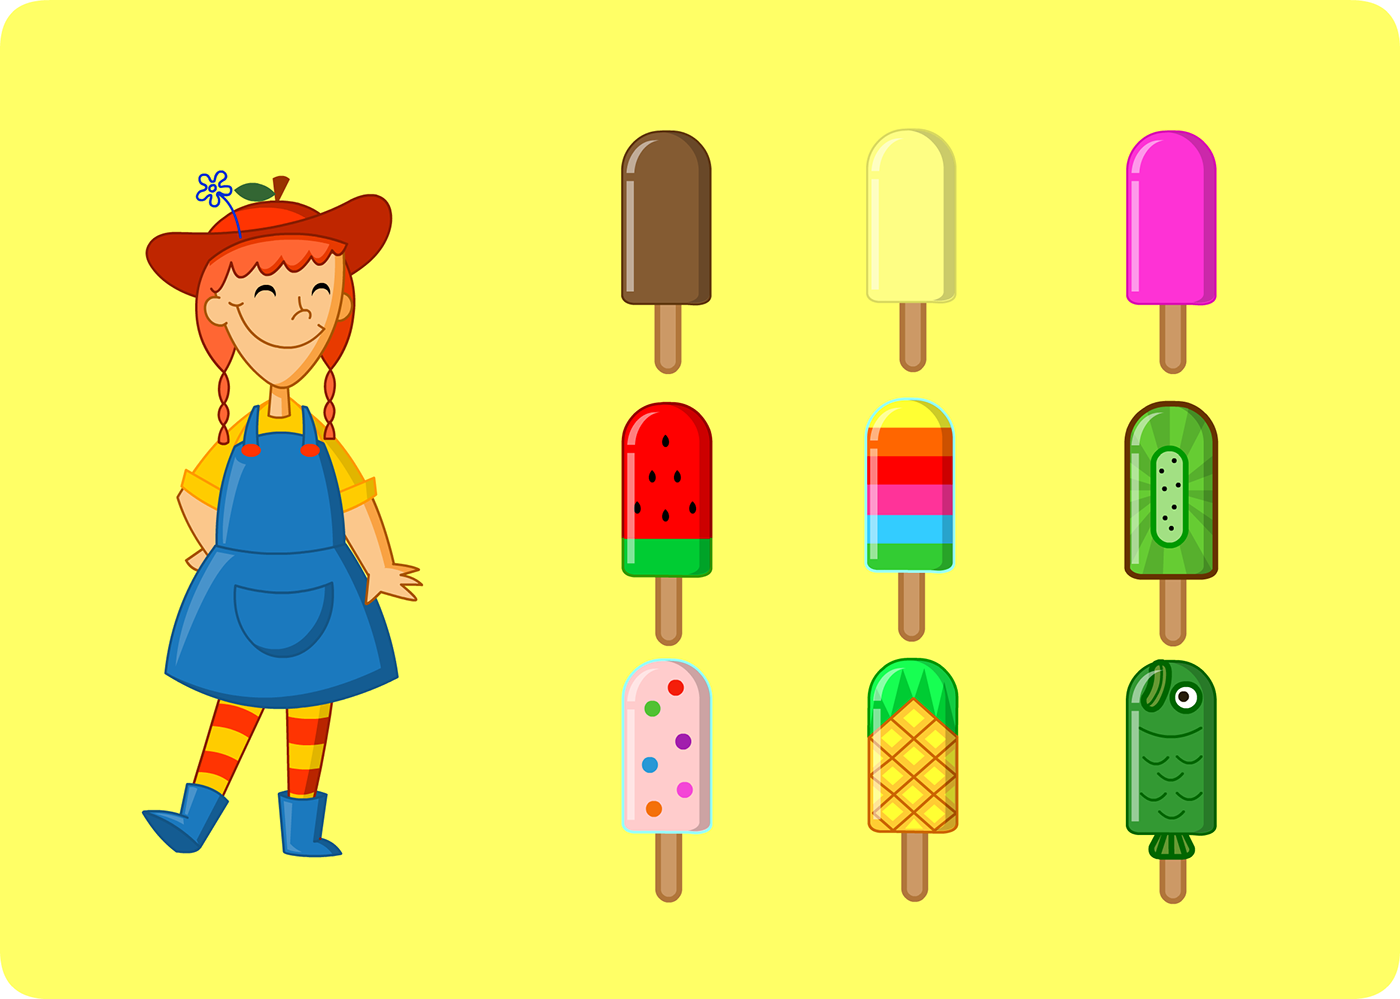 Video Games Character design  backgrounds ice cream factory fruits machines ILLUSTRATION  icecream Halloween